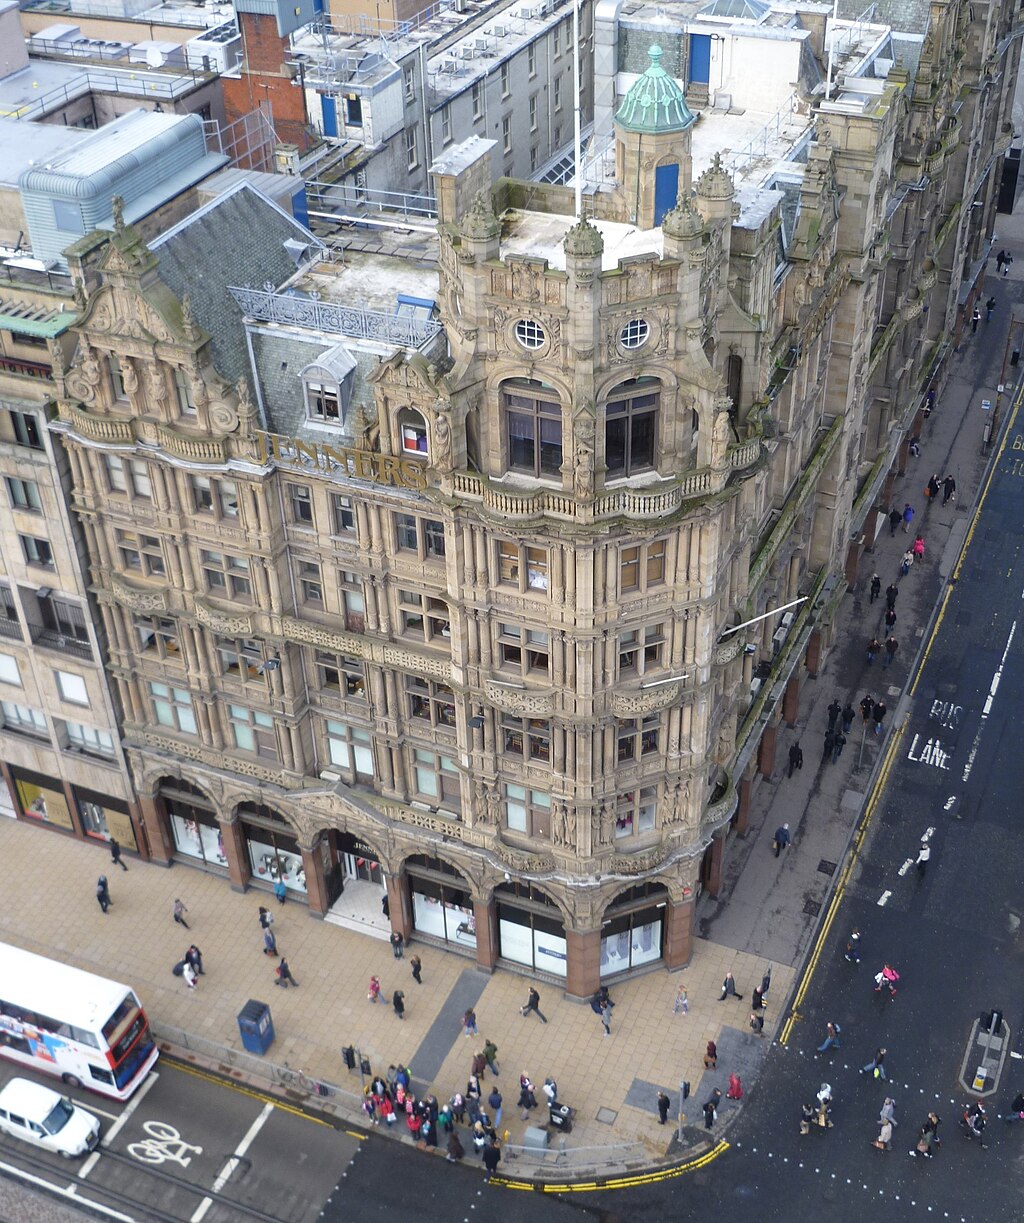 Jenners from the Scott Monument